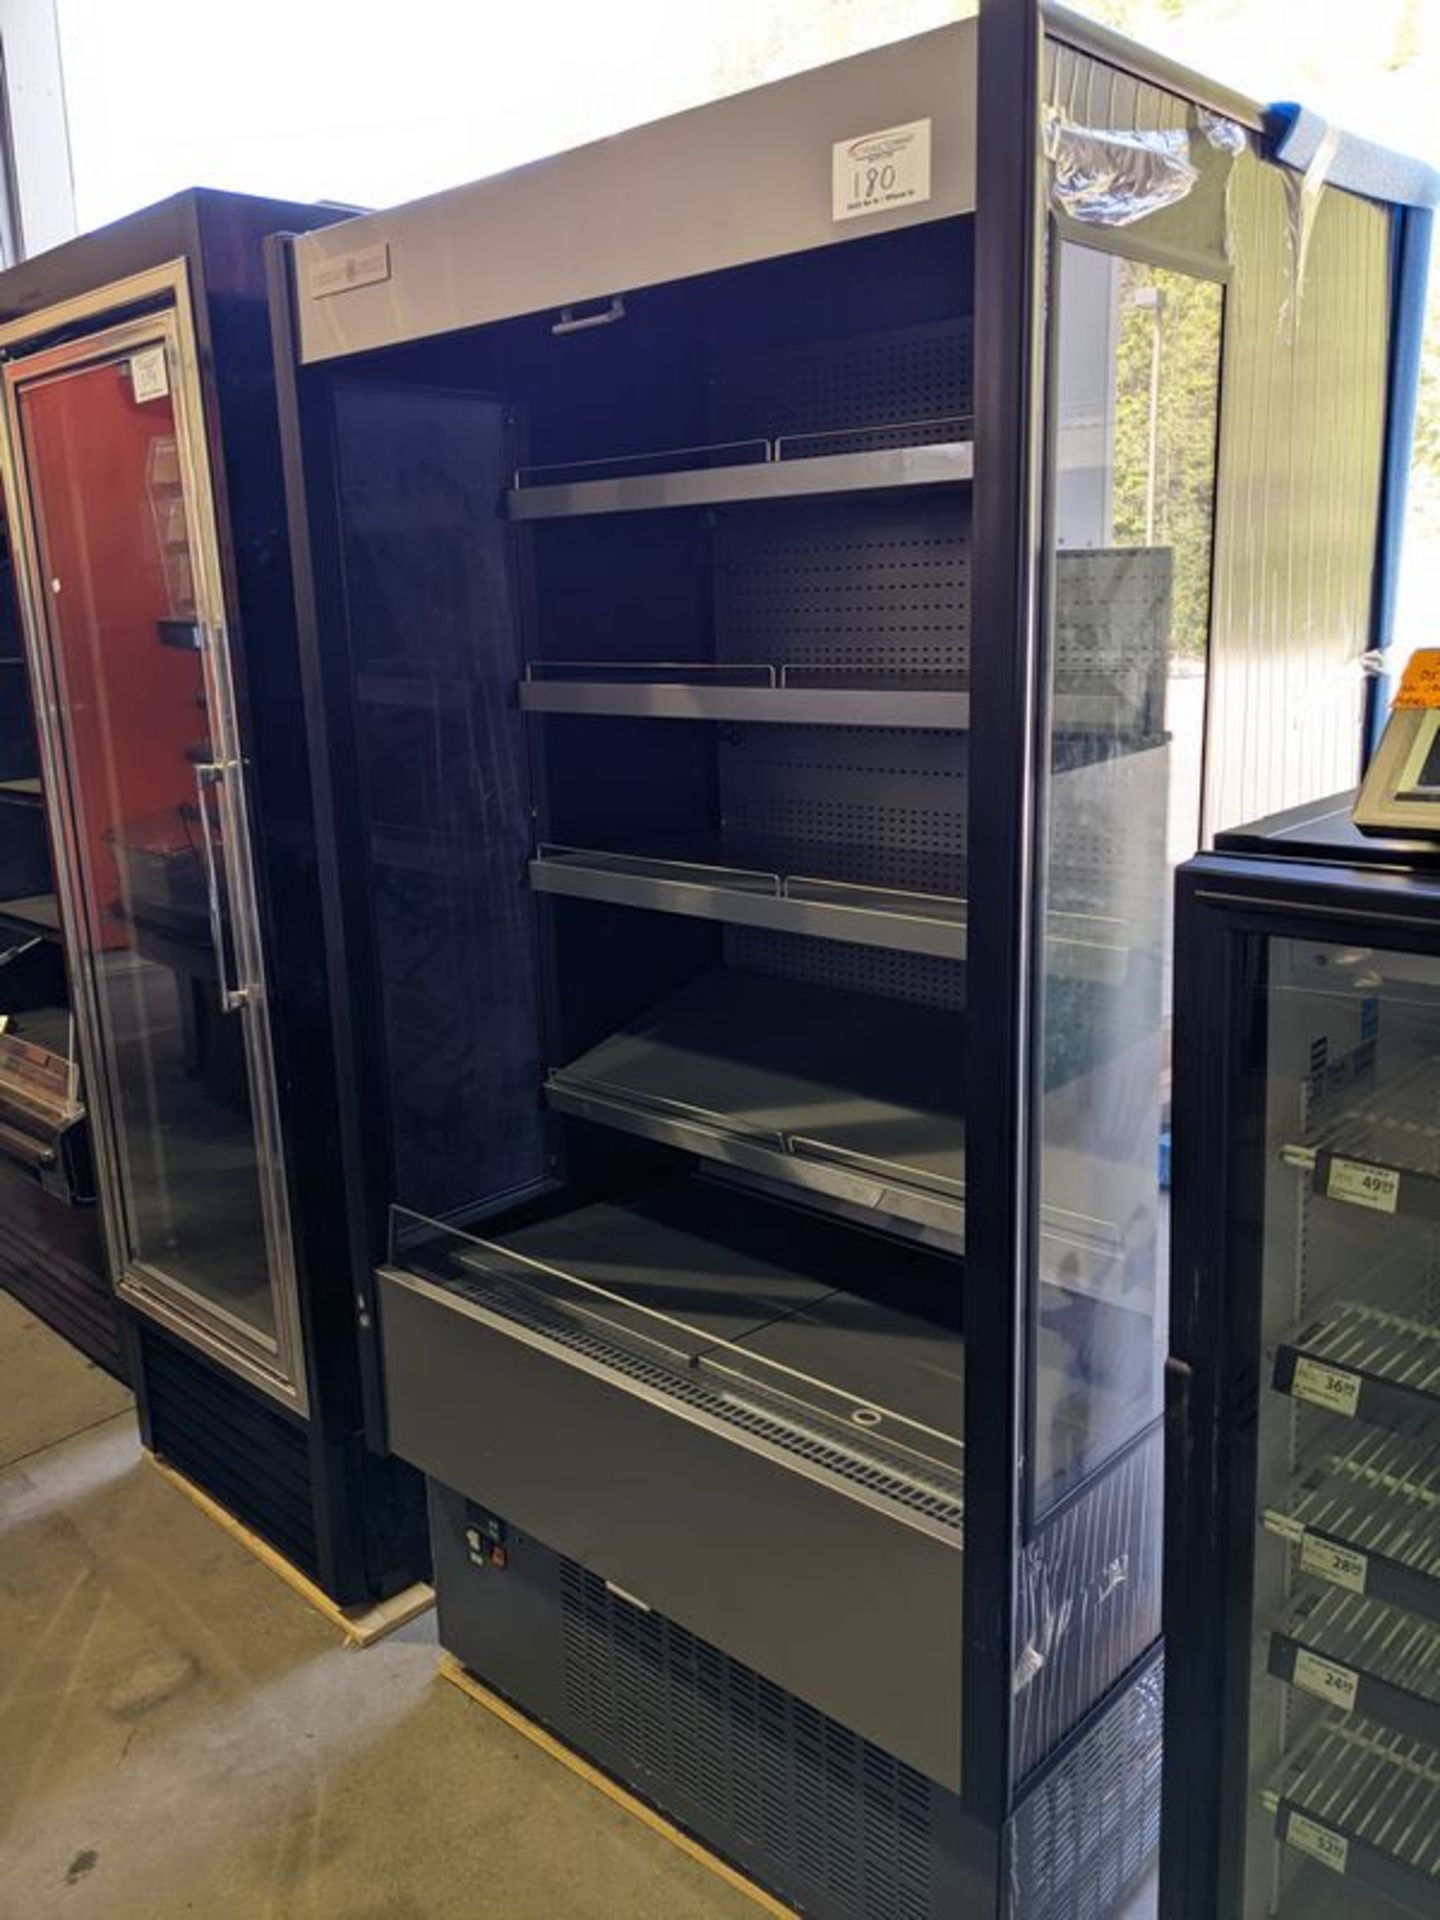 Hydra Kool 41" Self Contained Grab-n-Go - New in 2020 - Original Invoice $ 7895.00